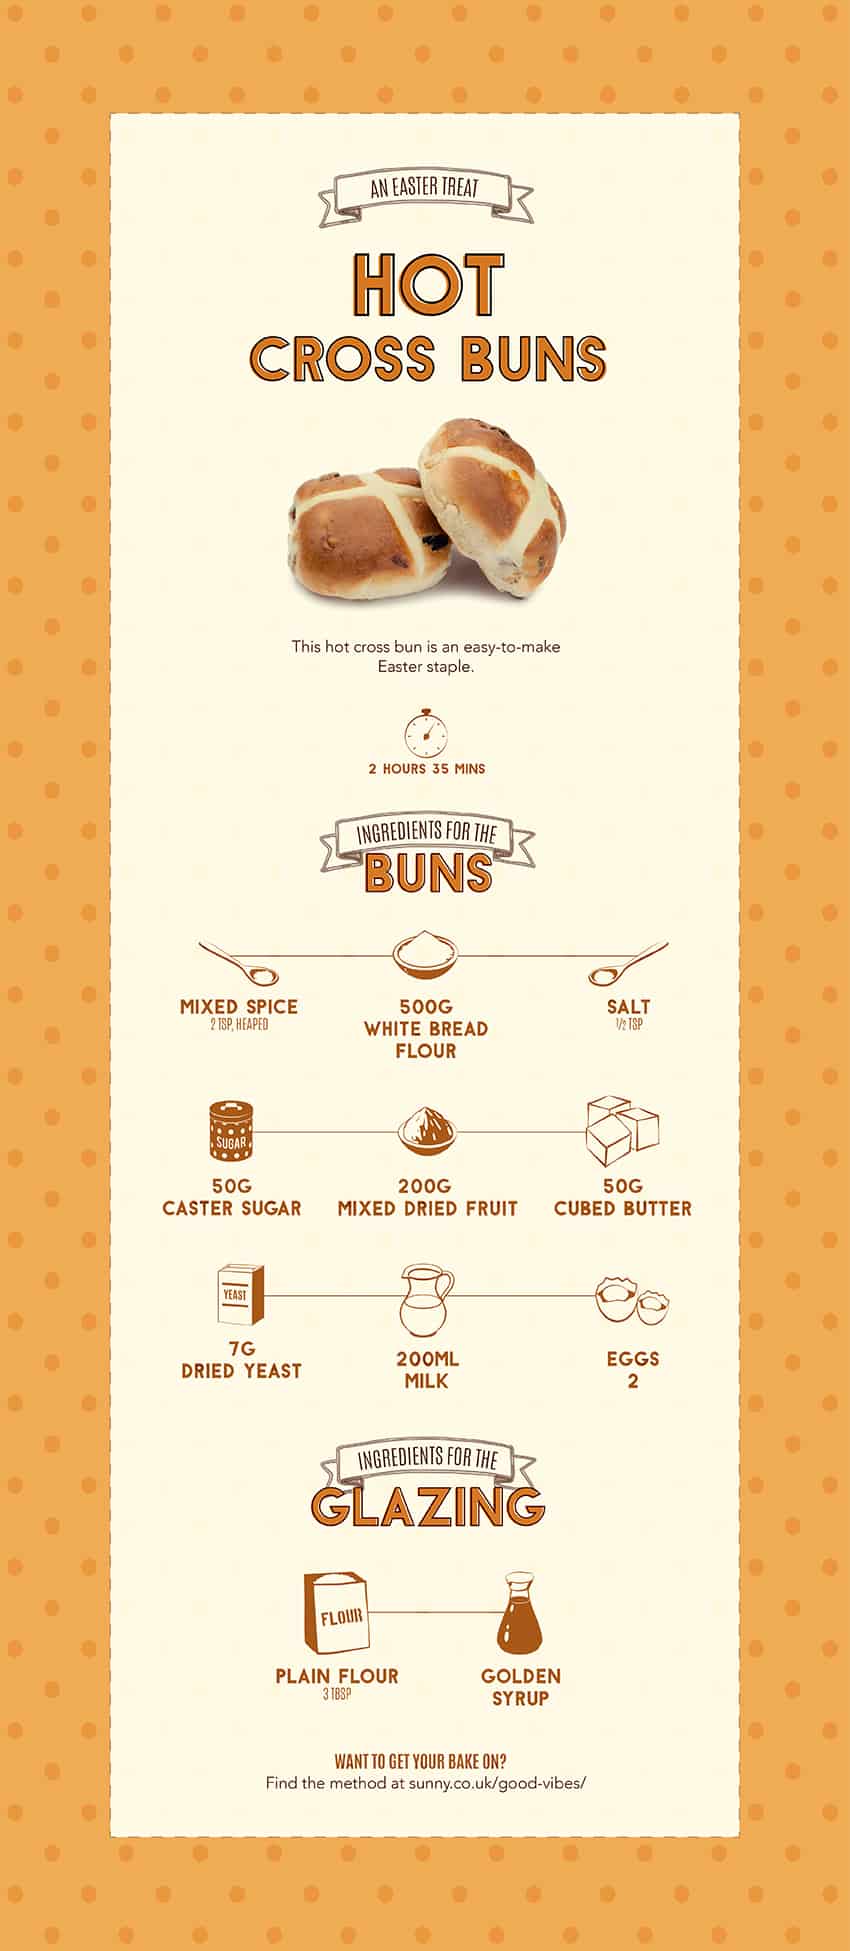 Image of hot cross buns infographic